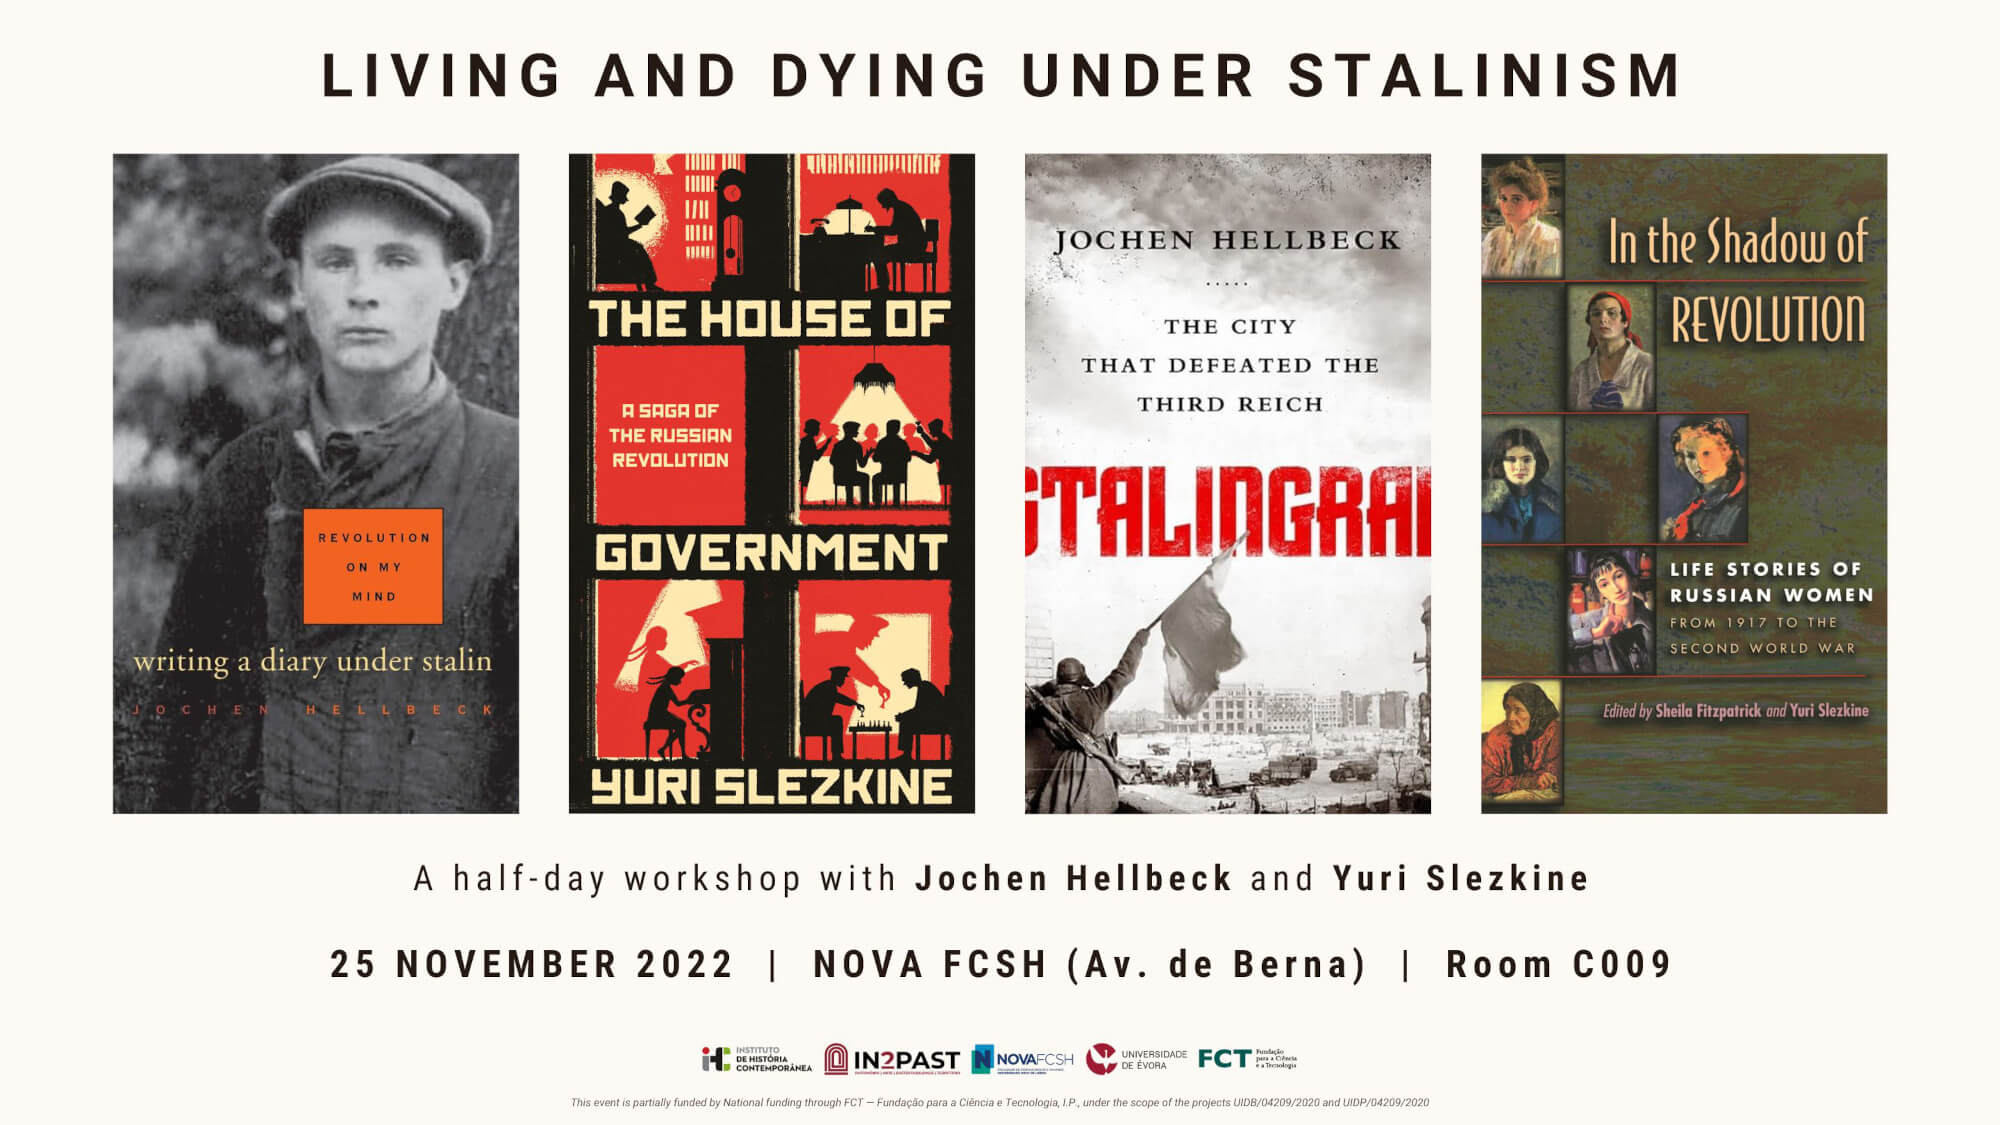 Poster for the workshop "Living and Dying under Stalinism", with Jochen Hellbeck and Yuri Slezkine. 25 November 2022, 13h45 at Room C009 of the Nova School of Social Sciences and Humanities, at Berna Avenue, in Lisbon. It includes the covers of the four books that will be discussed: "Revolution on My Mind" and "Stalingrad", by Jochen Hellbeck; and "The House of Government" and "In the Shadow of Revolution", by Yuri Slezkine.